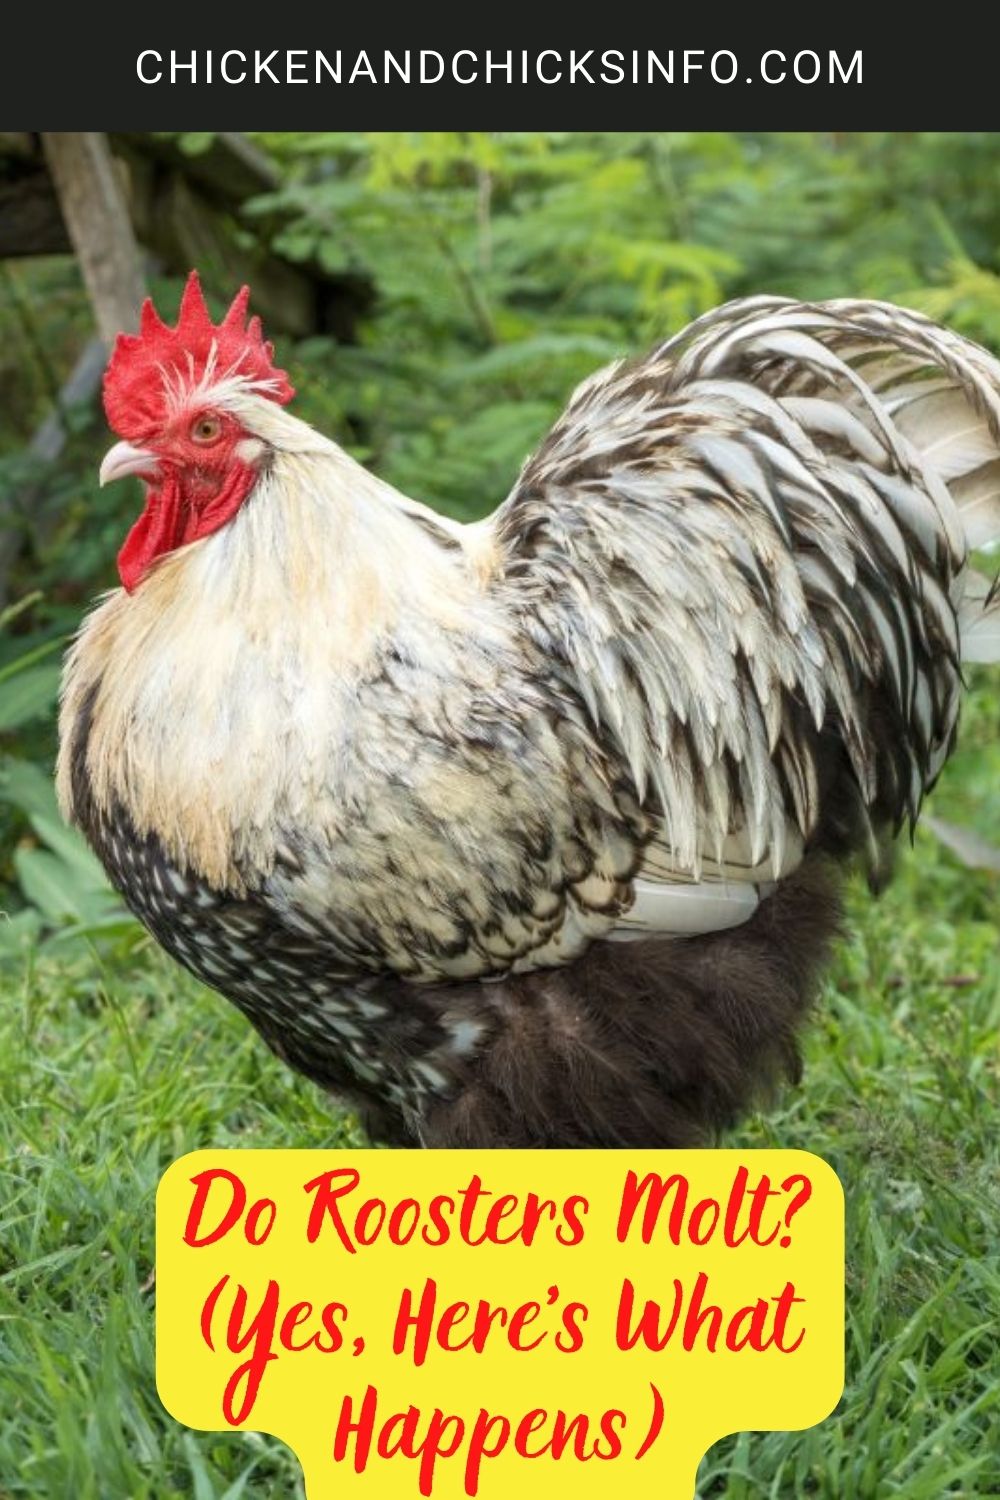 Do Roosters Molt? (Yes, Here’s What Happens) poster.
